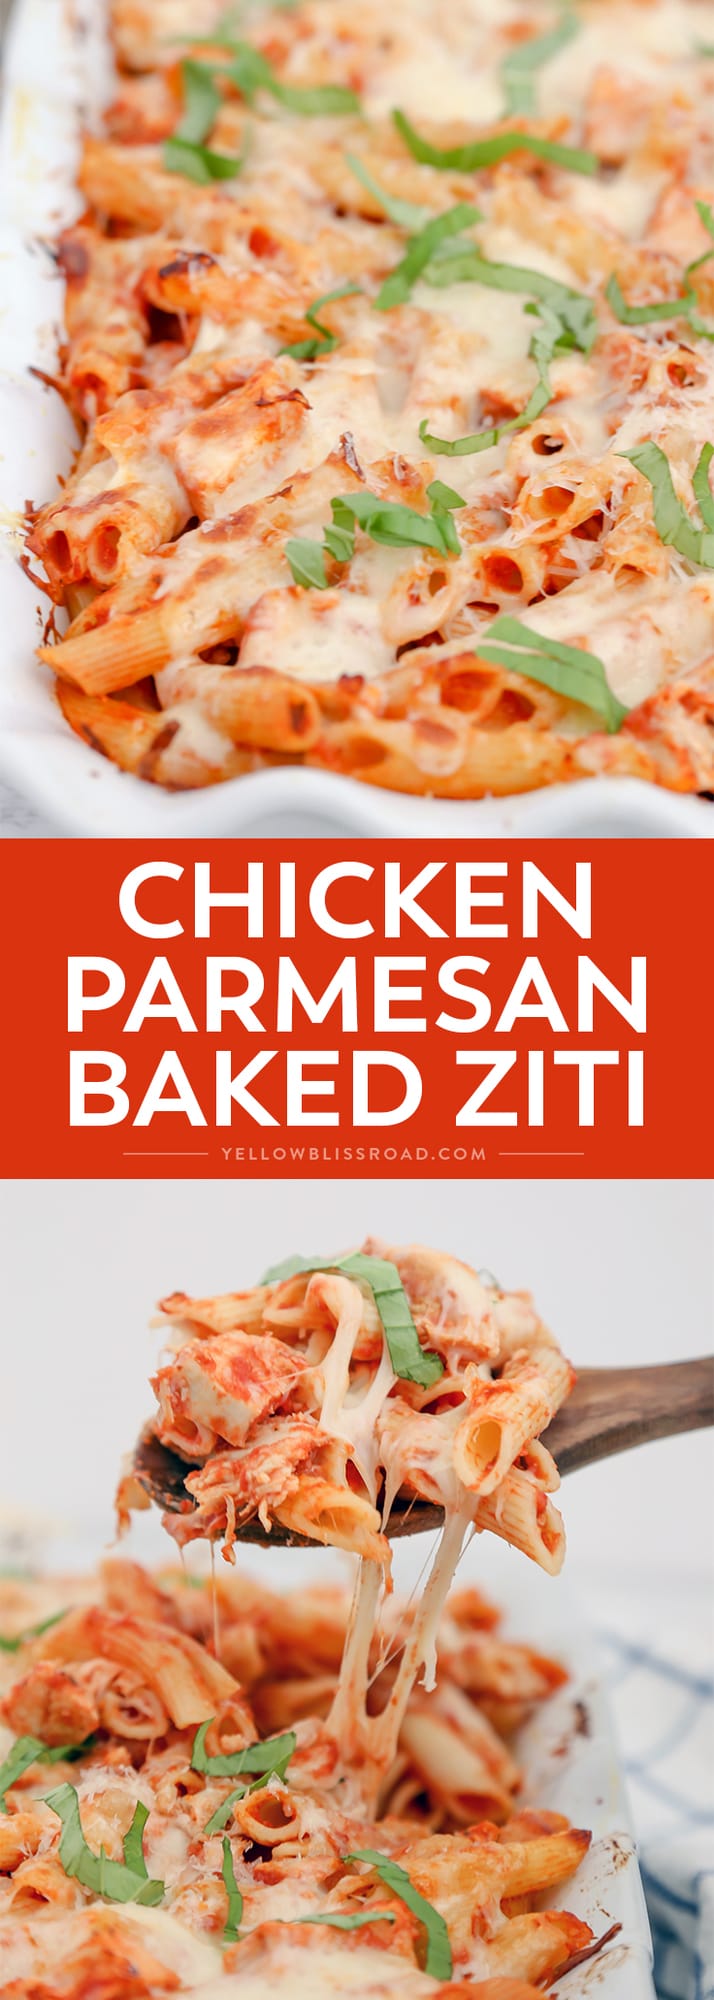 This Chicken Parmesan Baked Ziti is a quick and easy meal to whip up on a busy weeknight, and still classy enough for Sunday dinner.